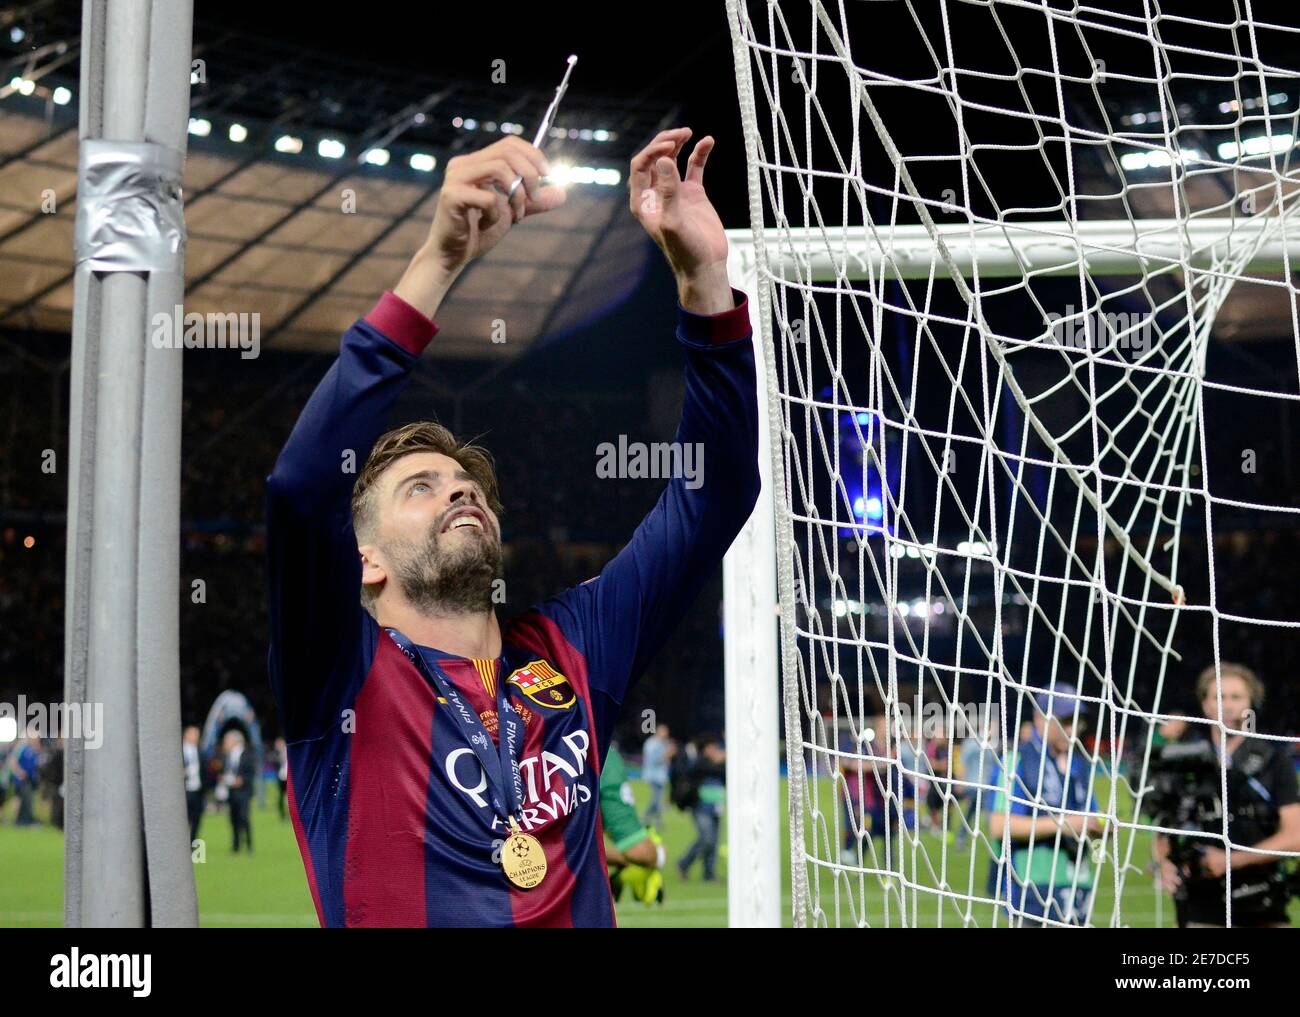 BERLIN, GERMANY - JUNE 6, 2015: Gerard Pique pictured during the 2014/15 UEFA Champions League Final between Juventus Torino and FC Barcelona at Olympiastadion. Stock Photo